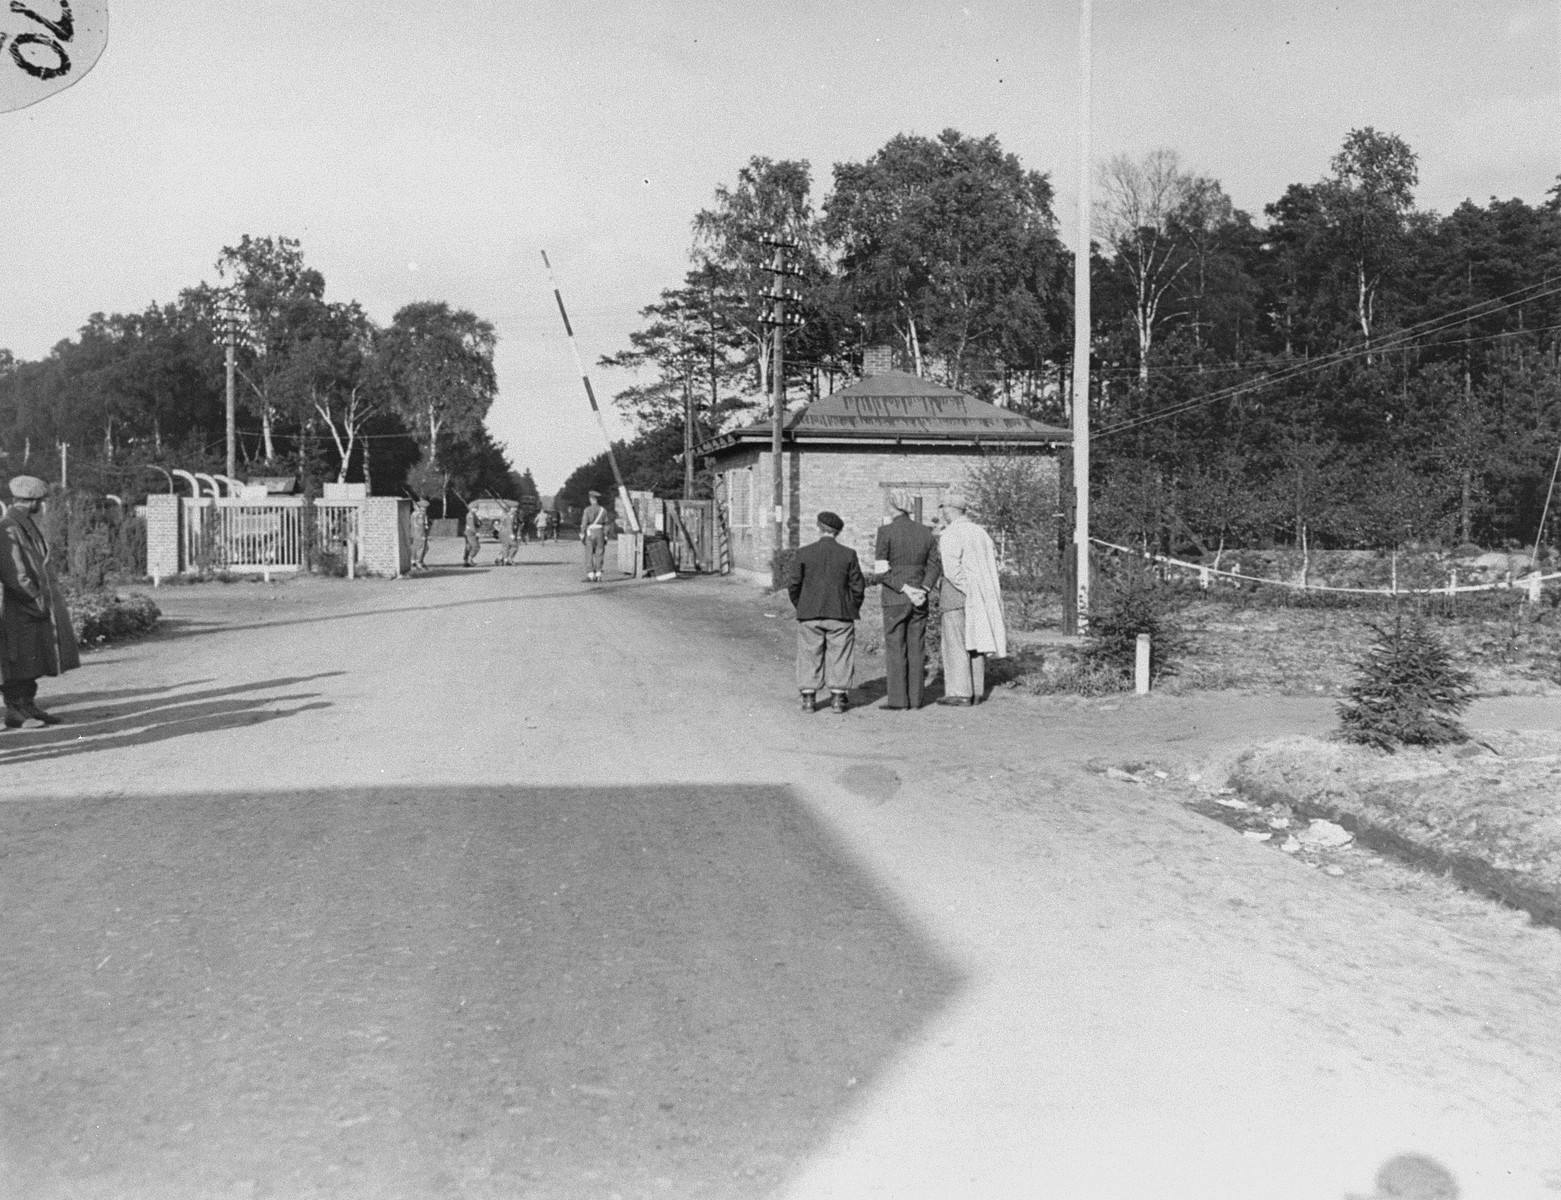 Survivors on the street in Bergen-Belsen facing the main gate to the camp.